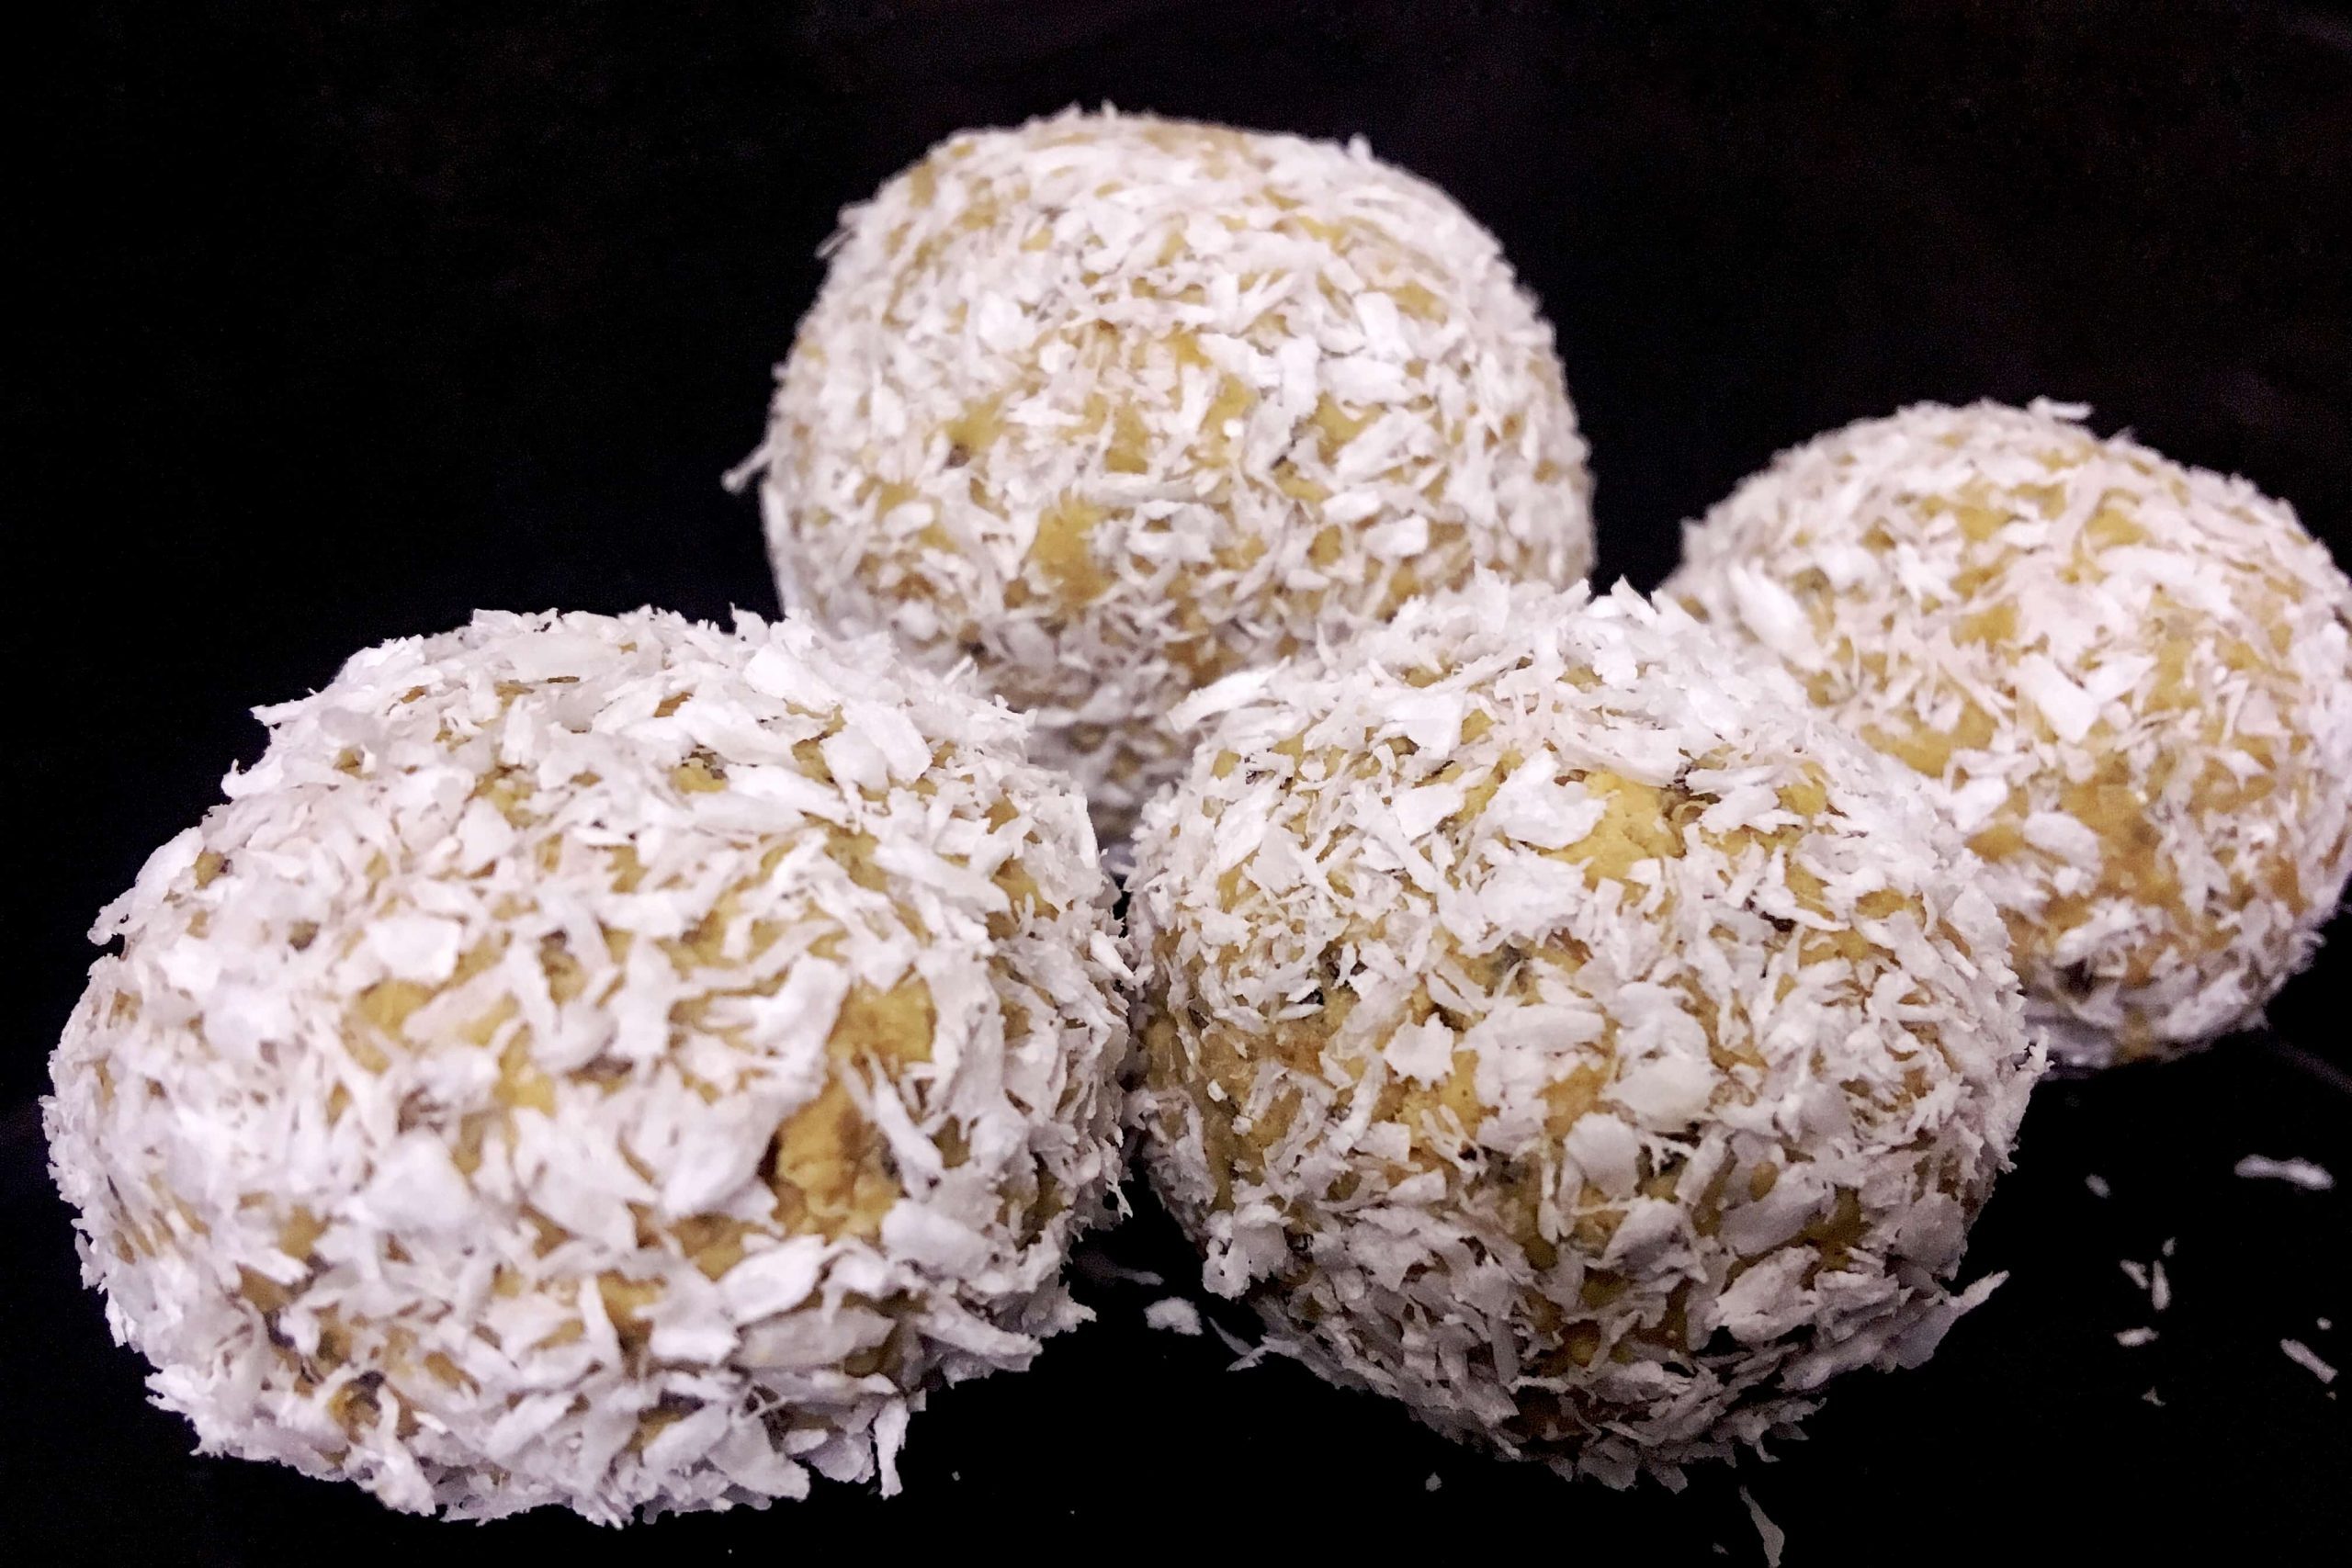 No bake energy balls covered in coconut flakes is a great healthy vegan snacks